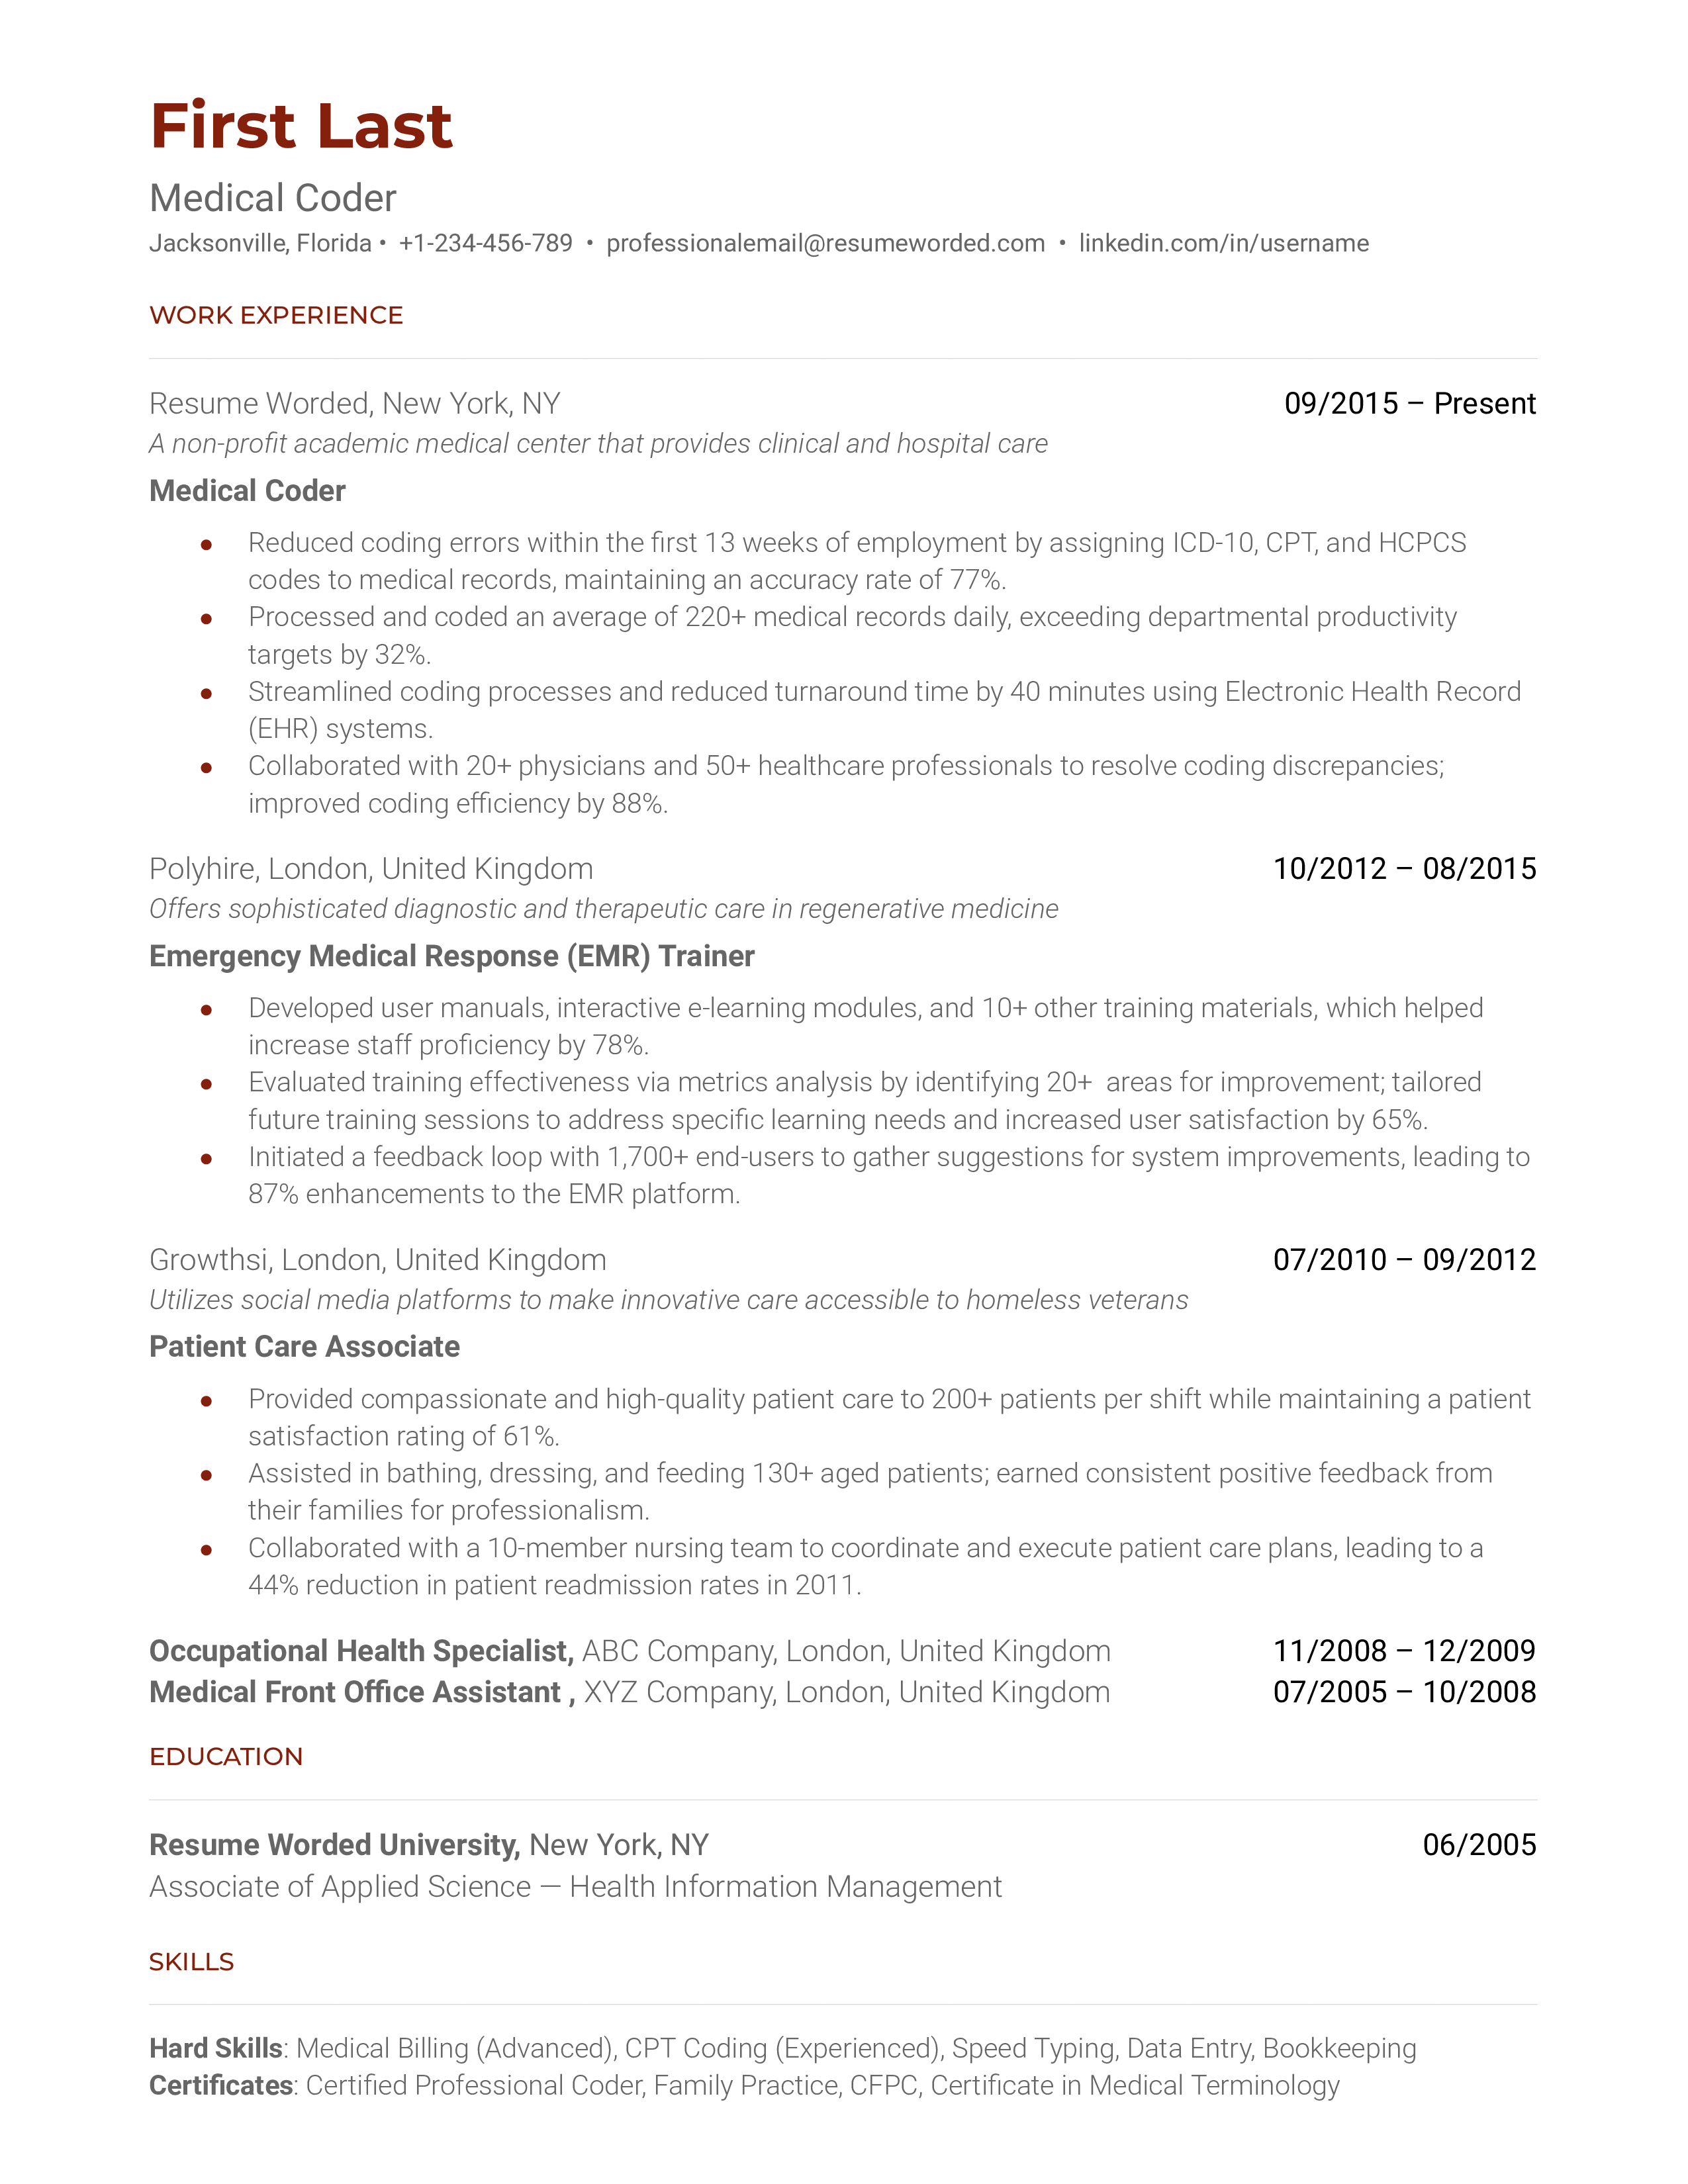 A streamlined resume showcasing skills and certifications of a Medical Coder.